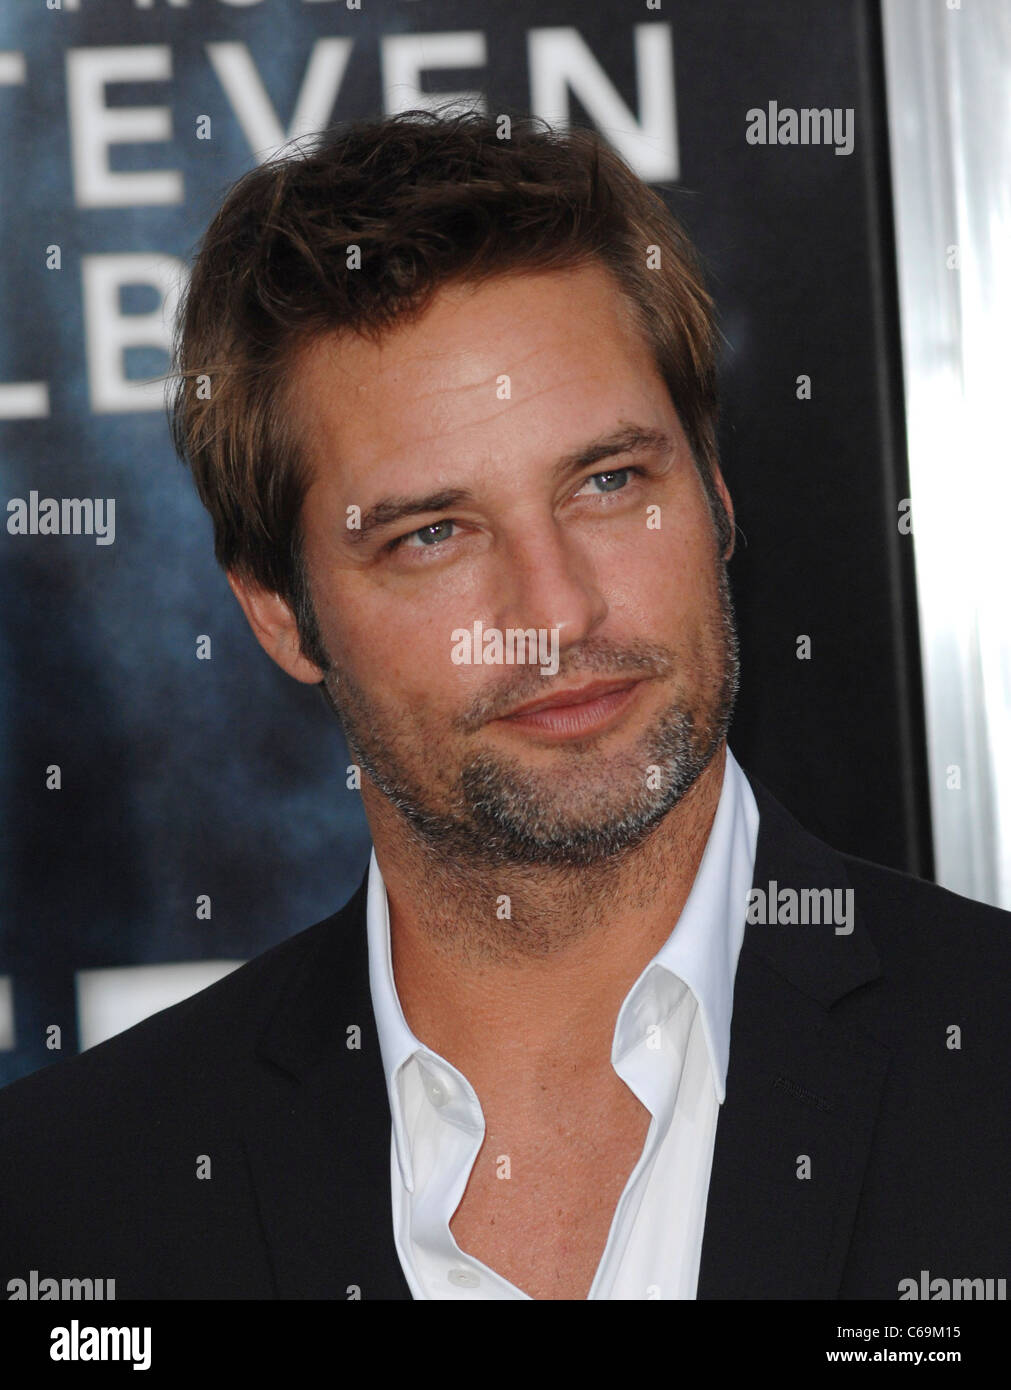 Josh Holloway at arrivals for SUPER 8 Premiere, Regency Village Theater, Los Angeles, CA June 8, 2011. Photo By: Elizabeth Goodenough/Everett Collection Stock Photo